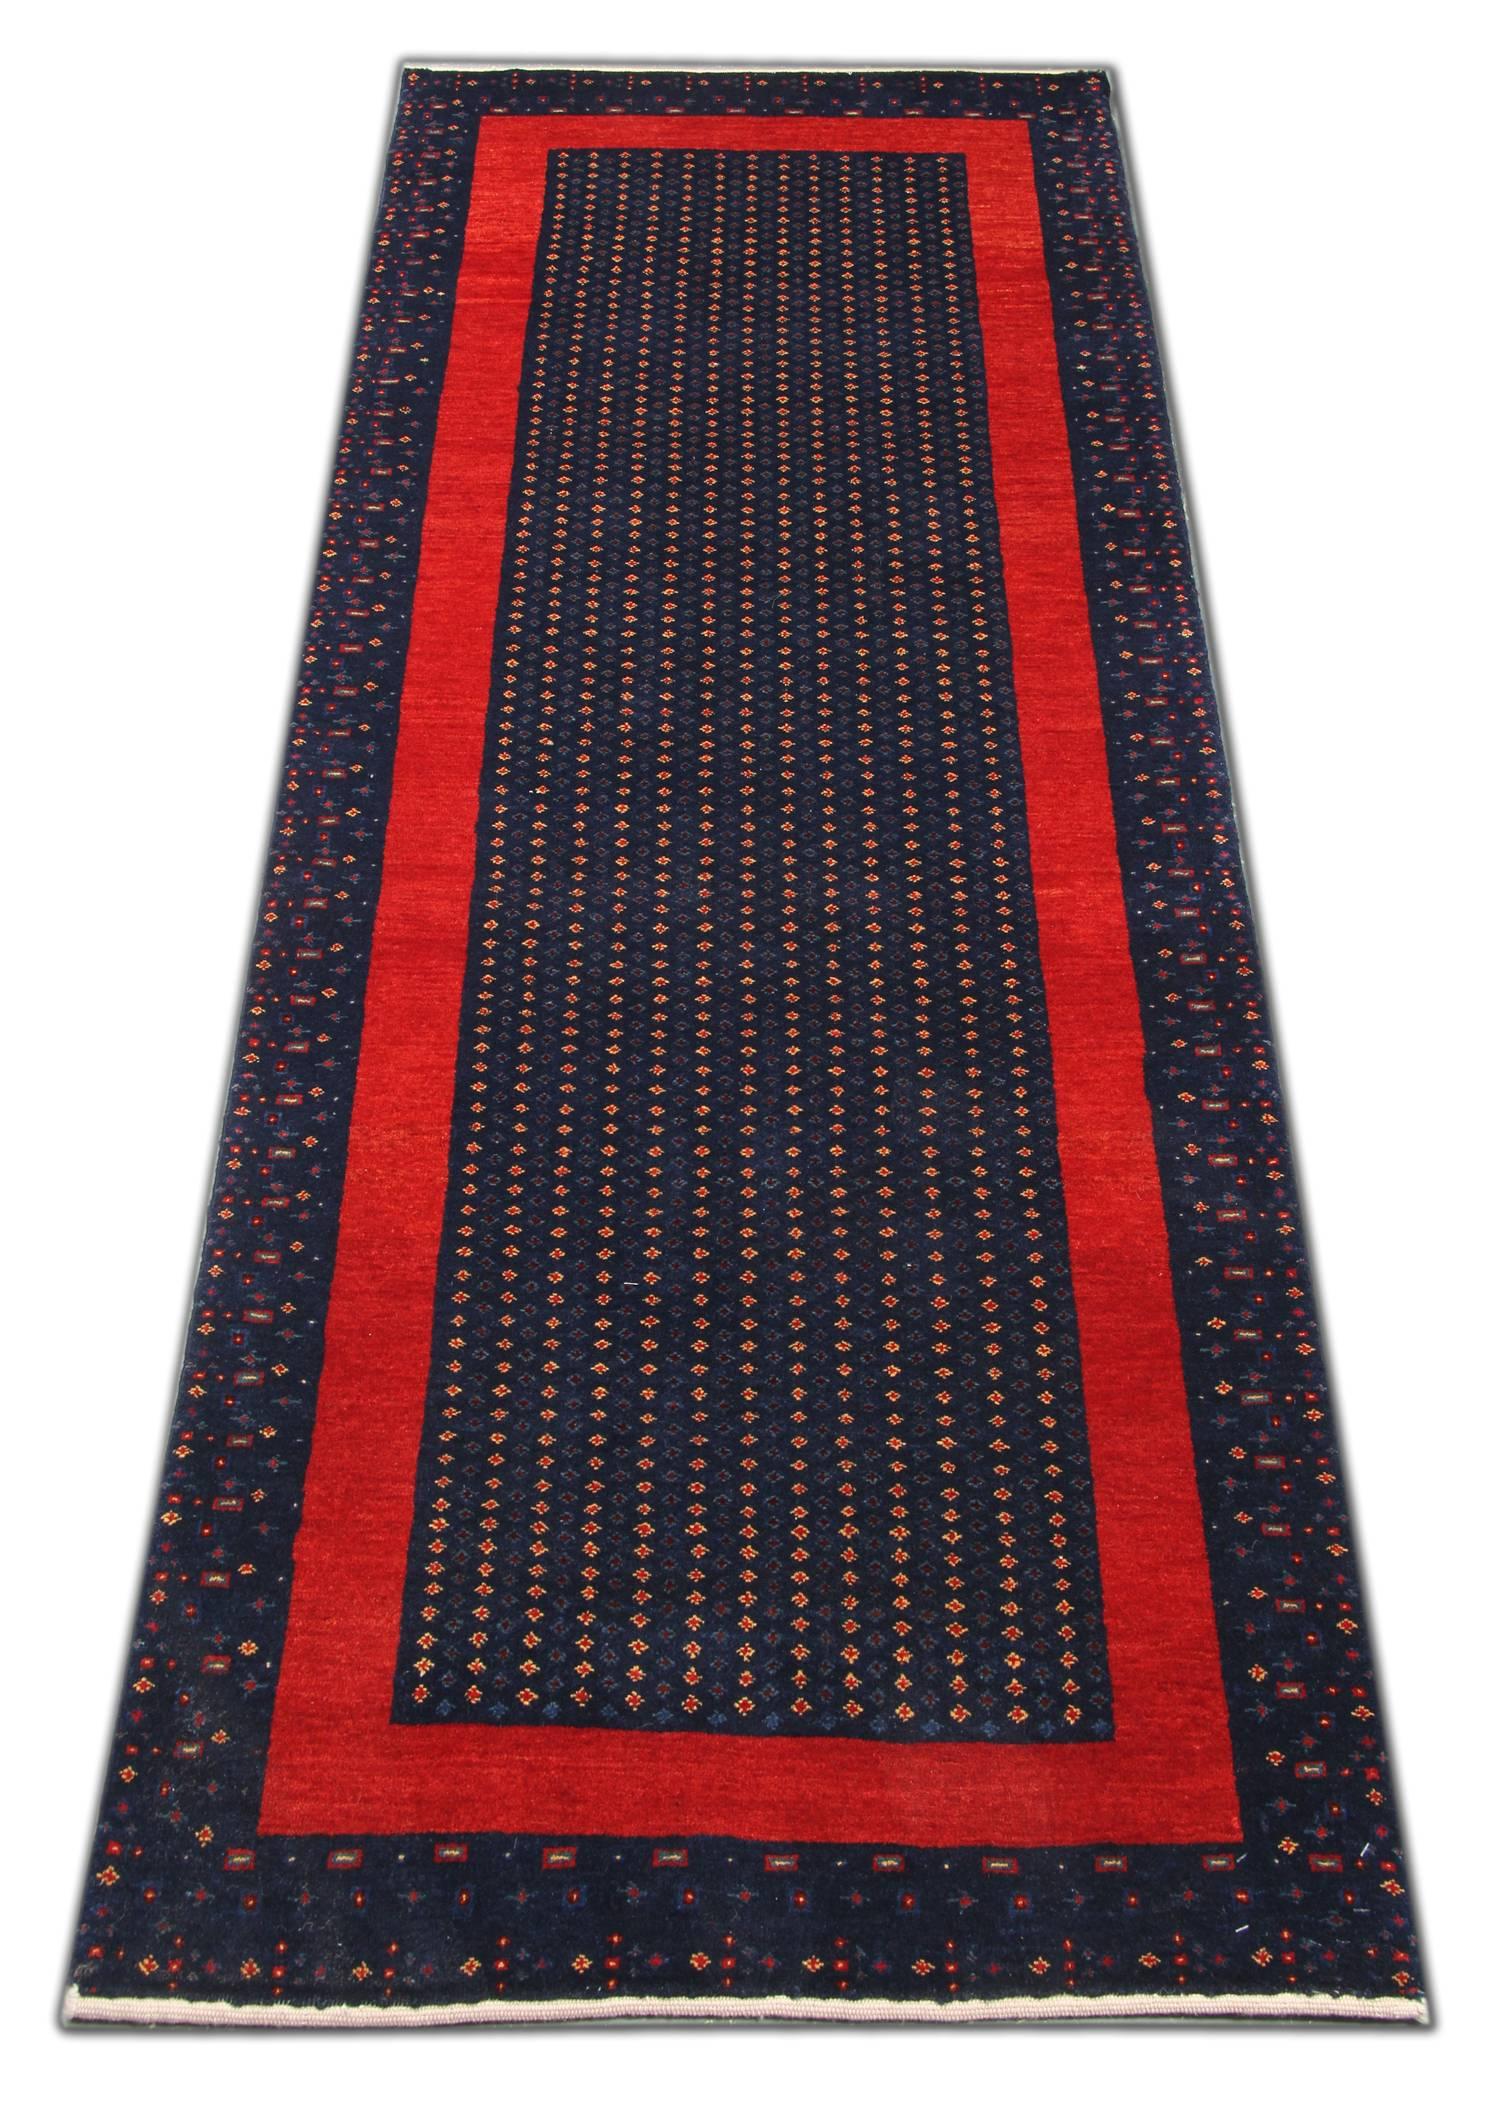 This simple handwoven wool runner rug features a deep blue background with a simple repeat pattern spotted motif design and a bold linear border woven in a contrasting red. This rug would make a perfect addition to any home. Suitable for both modern